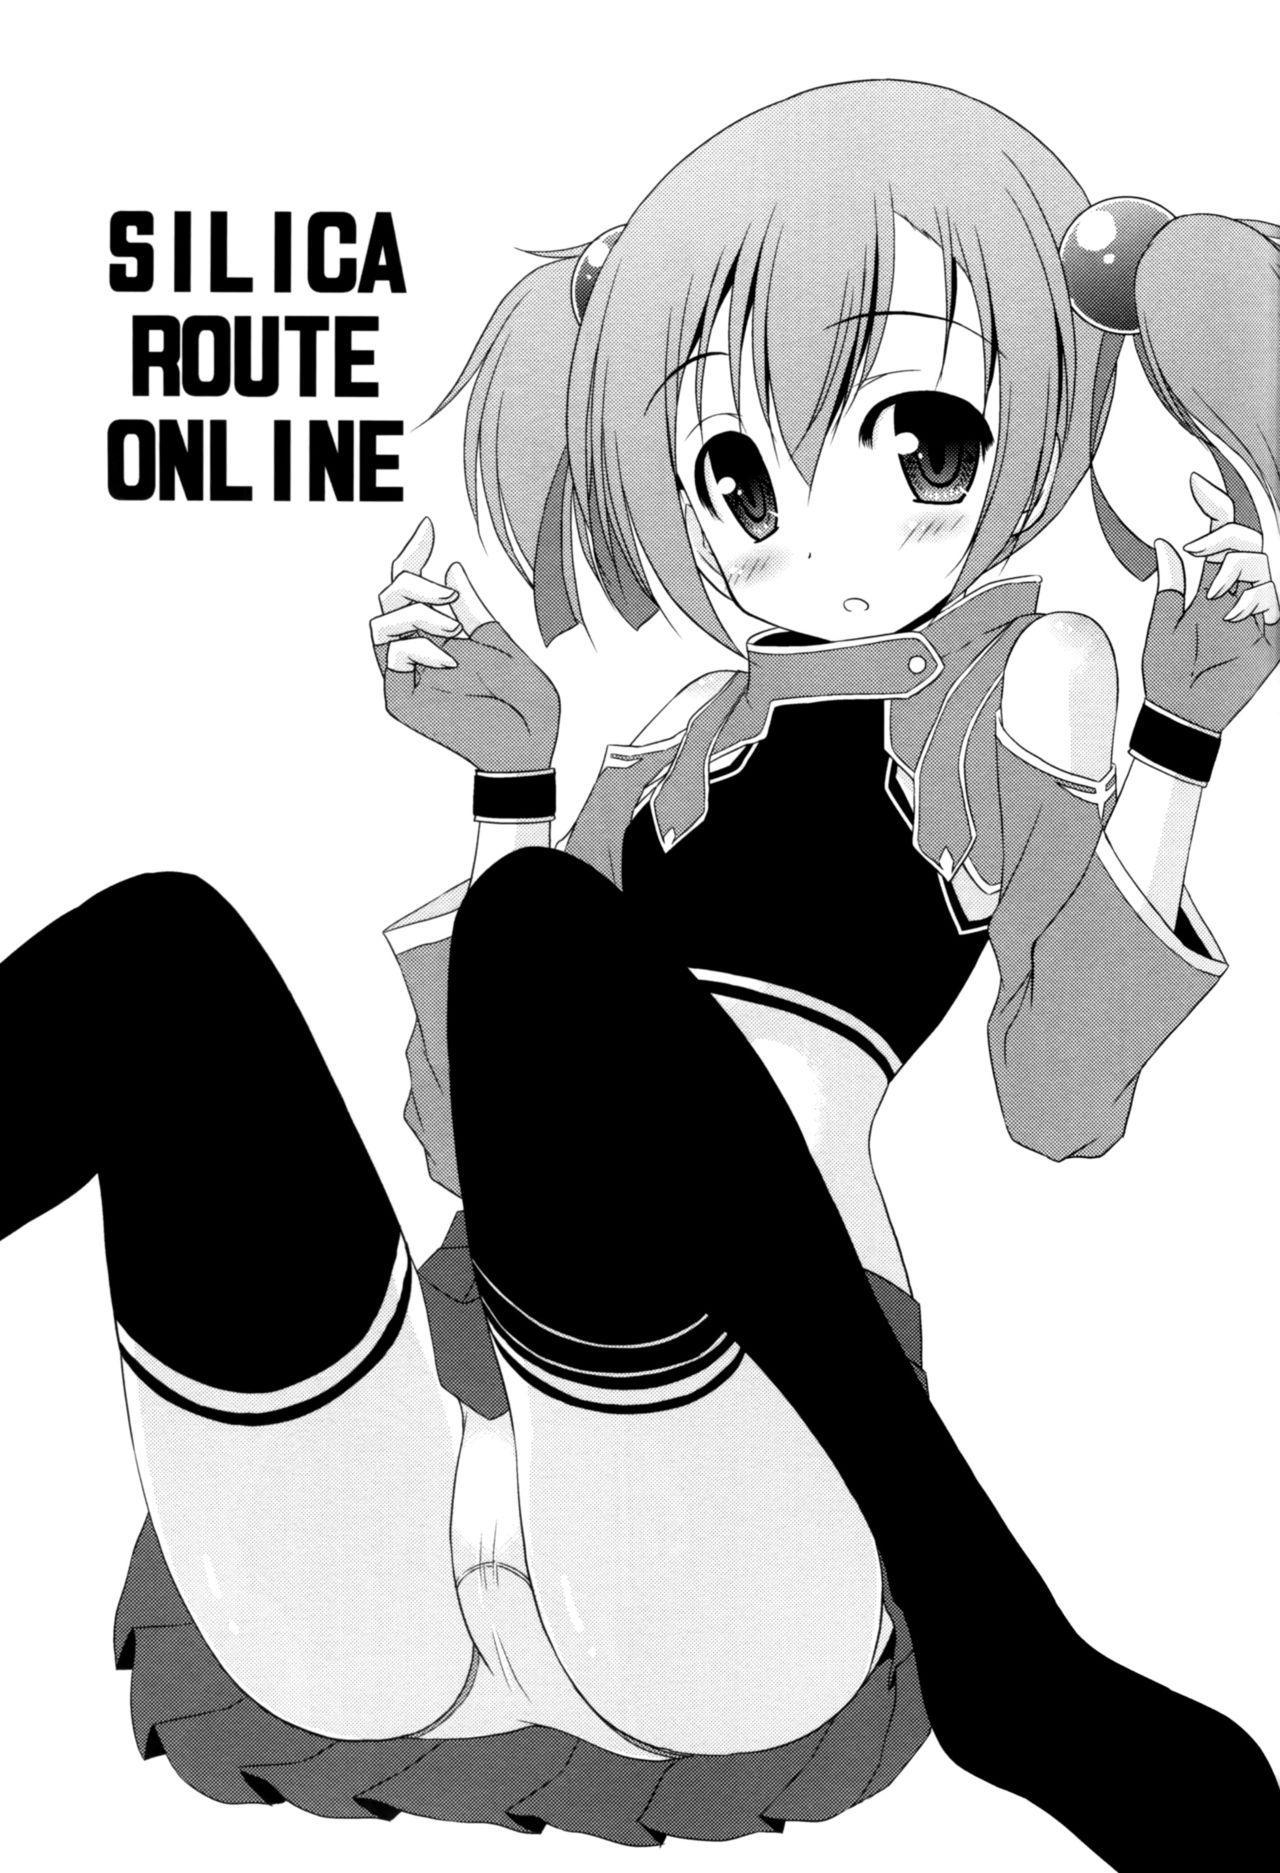 Gay Orgy Silica Route Online - Sword art online Aunt - Page 2